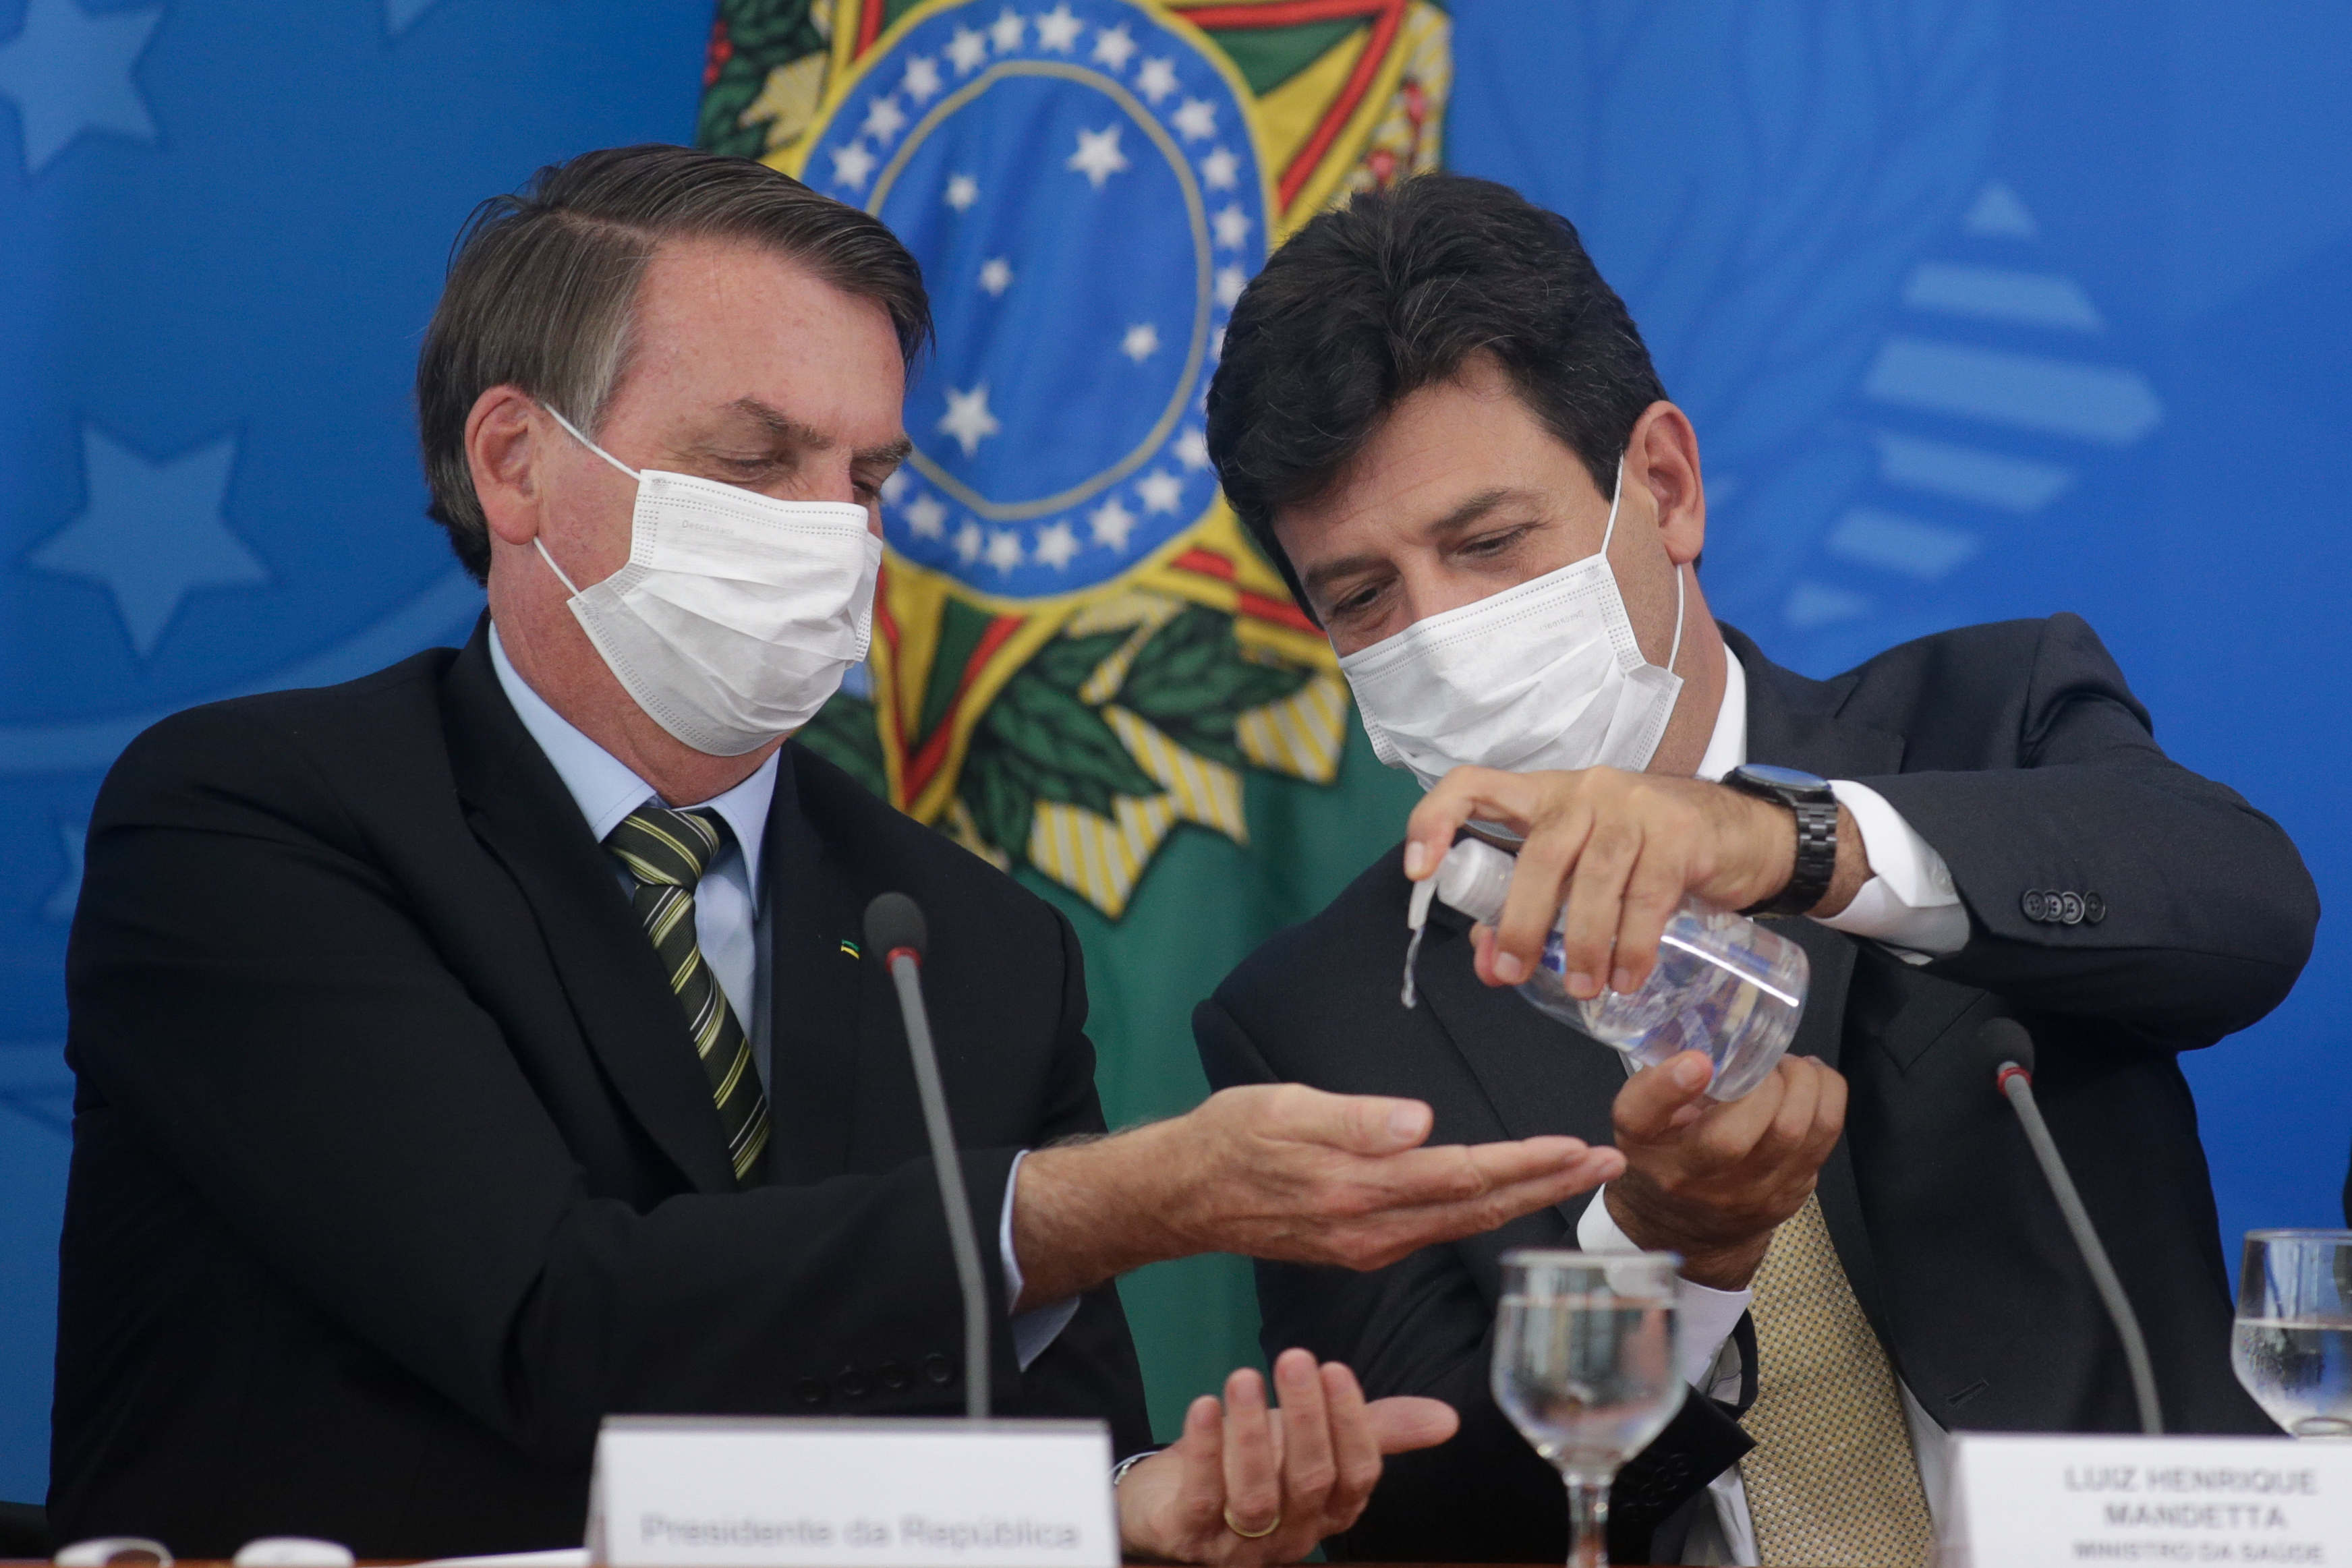 Brazilian Health Minister Luiz Henrique Mandetta (R) gives gel alcohol to President of Brazil Jair Bolsonaro, both using protective masks, during a press conference regarding government plans and measures on Coronavirus (COVID-19) Outbreak in Brazil, at the Planalto Palace on March 18, 2020 in Brasilia, Brazil. (Photo by Andre Coelho/Getty Images)